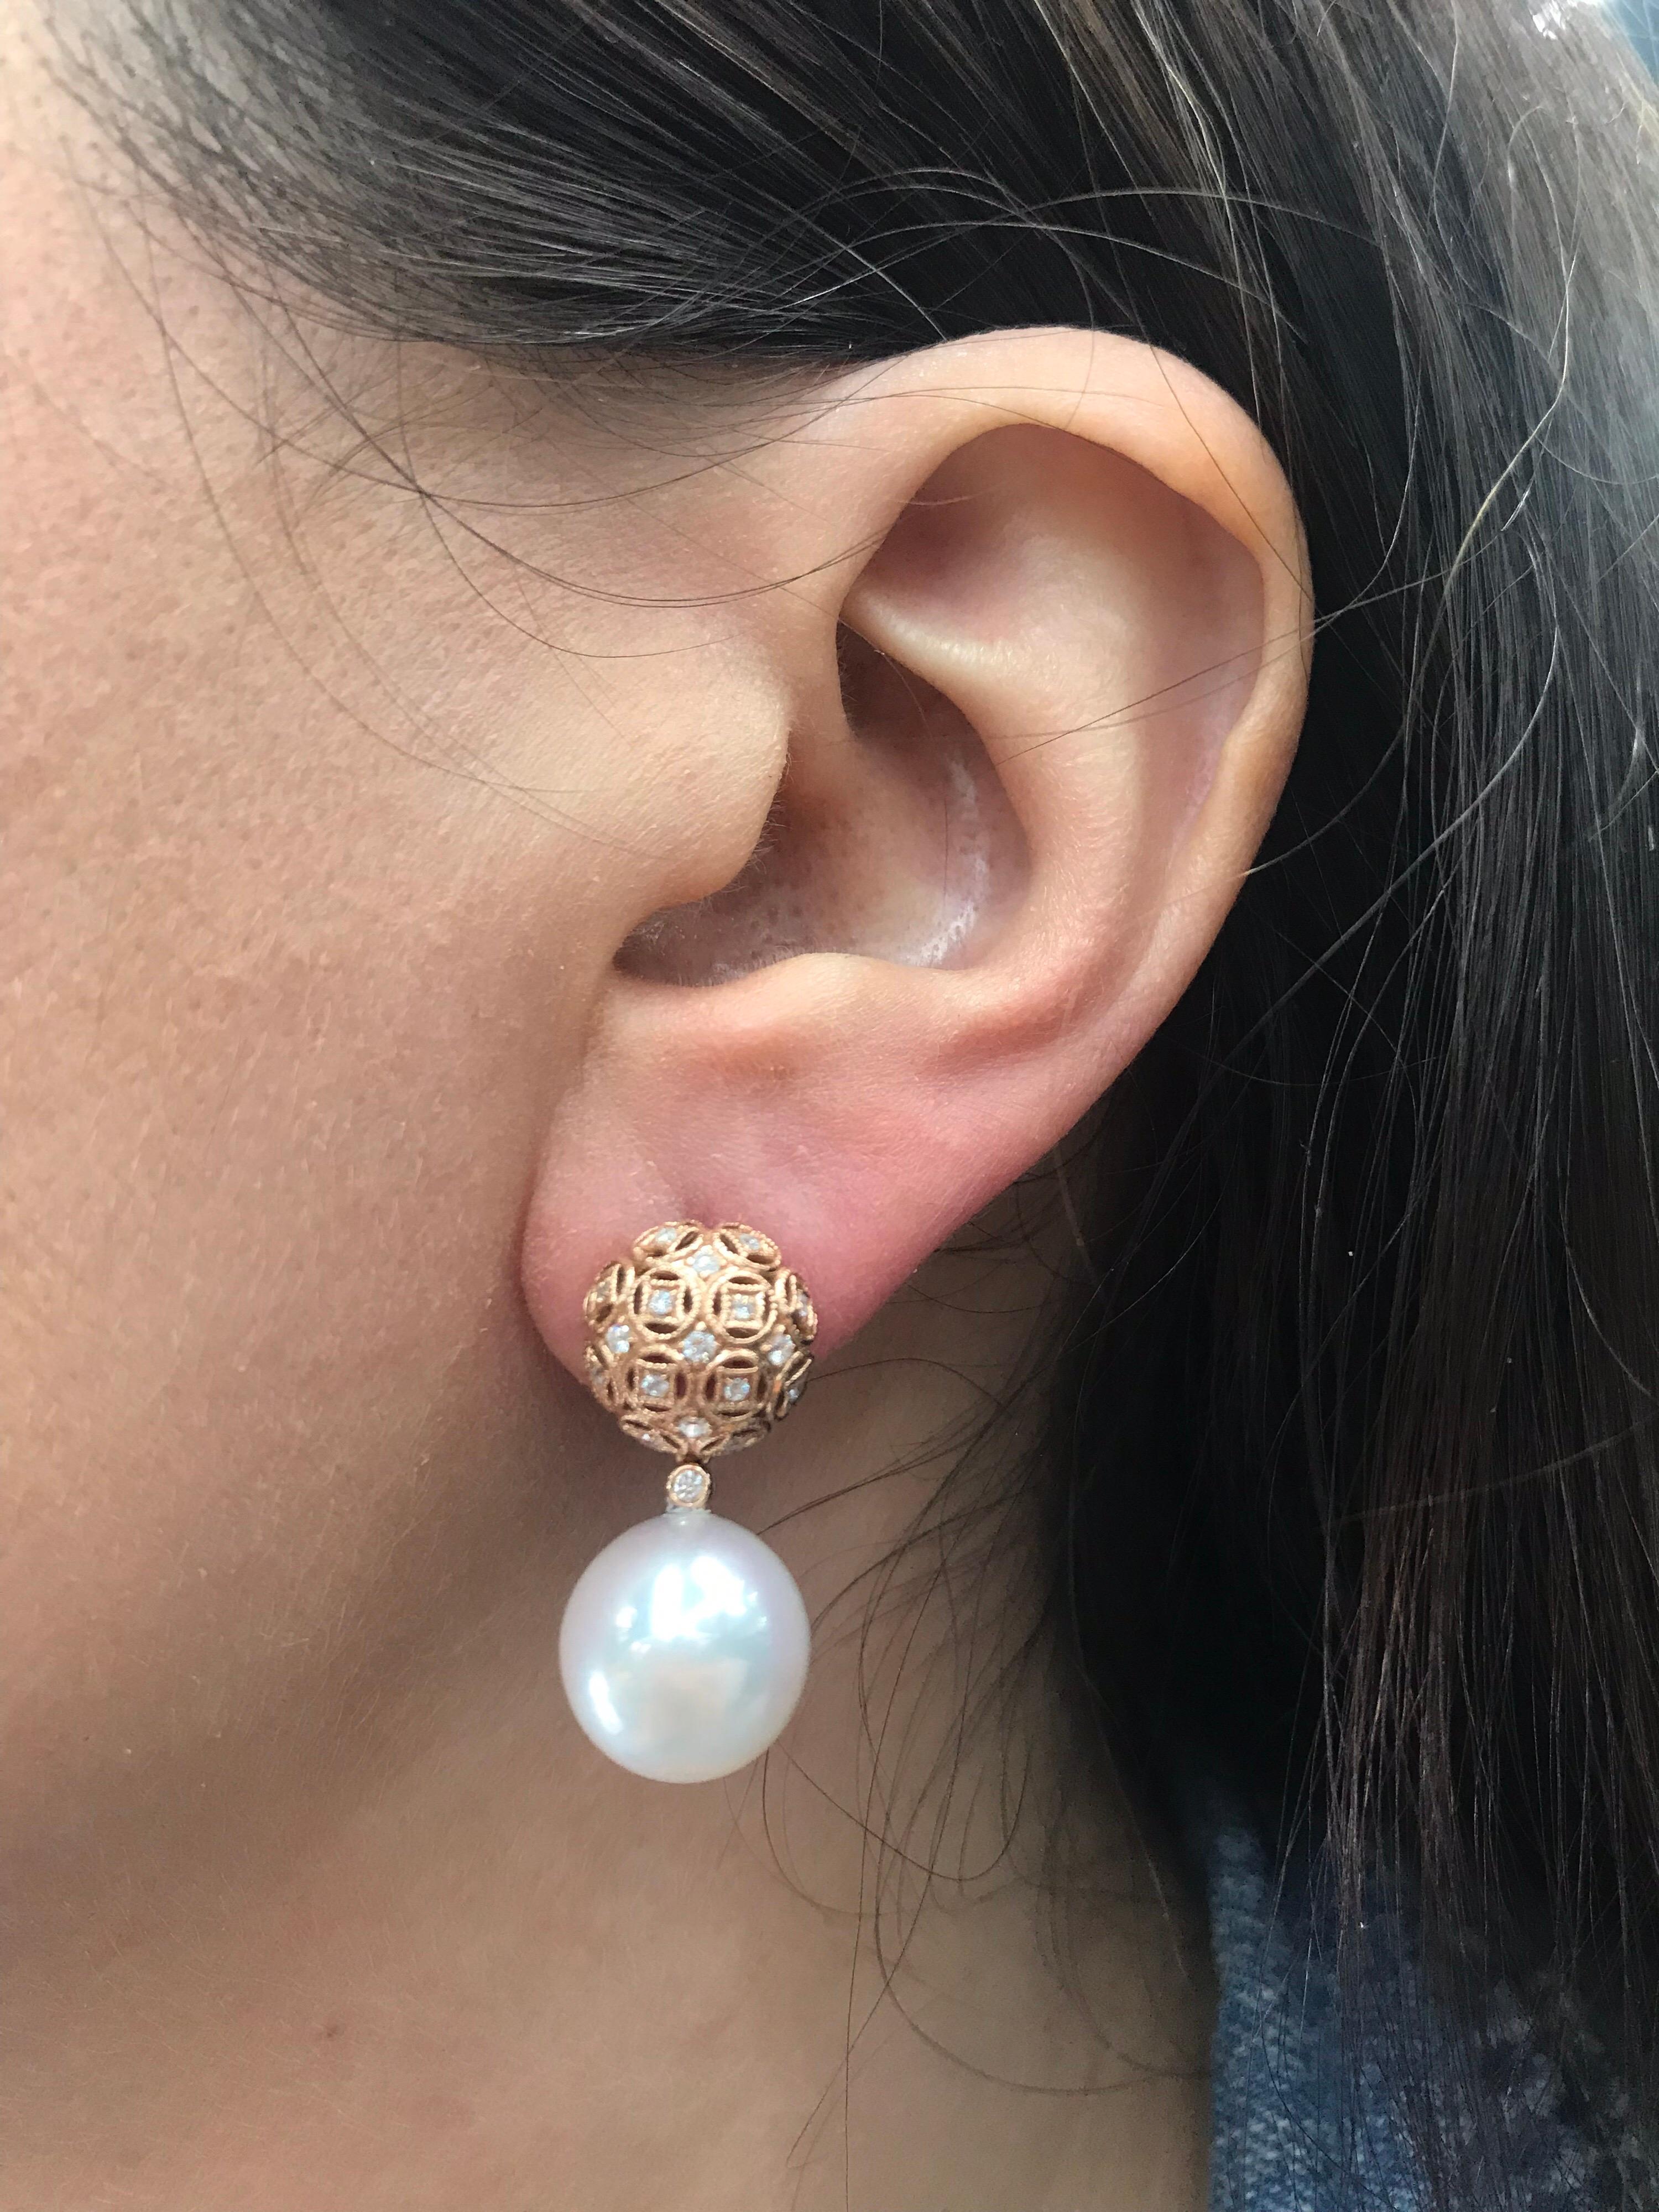 18K Rose gold drop earrings featuring two South Sea Pearls measuring 13-14 mm and 36 round brilliants weighing 0.30 carats in a miligrain motif. 